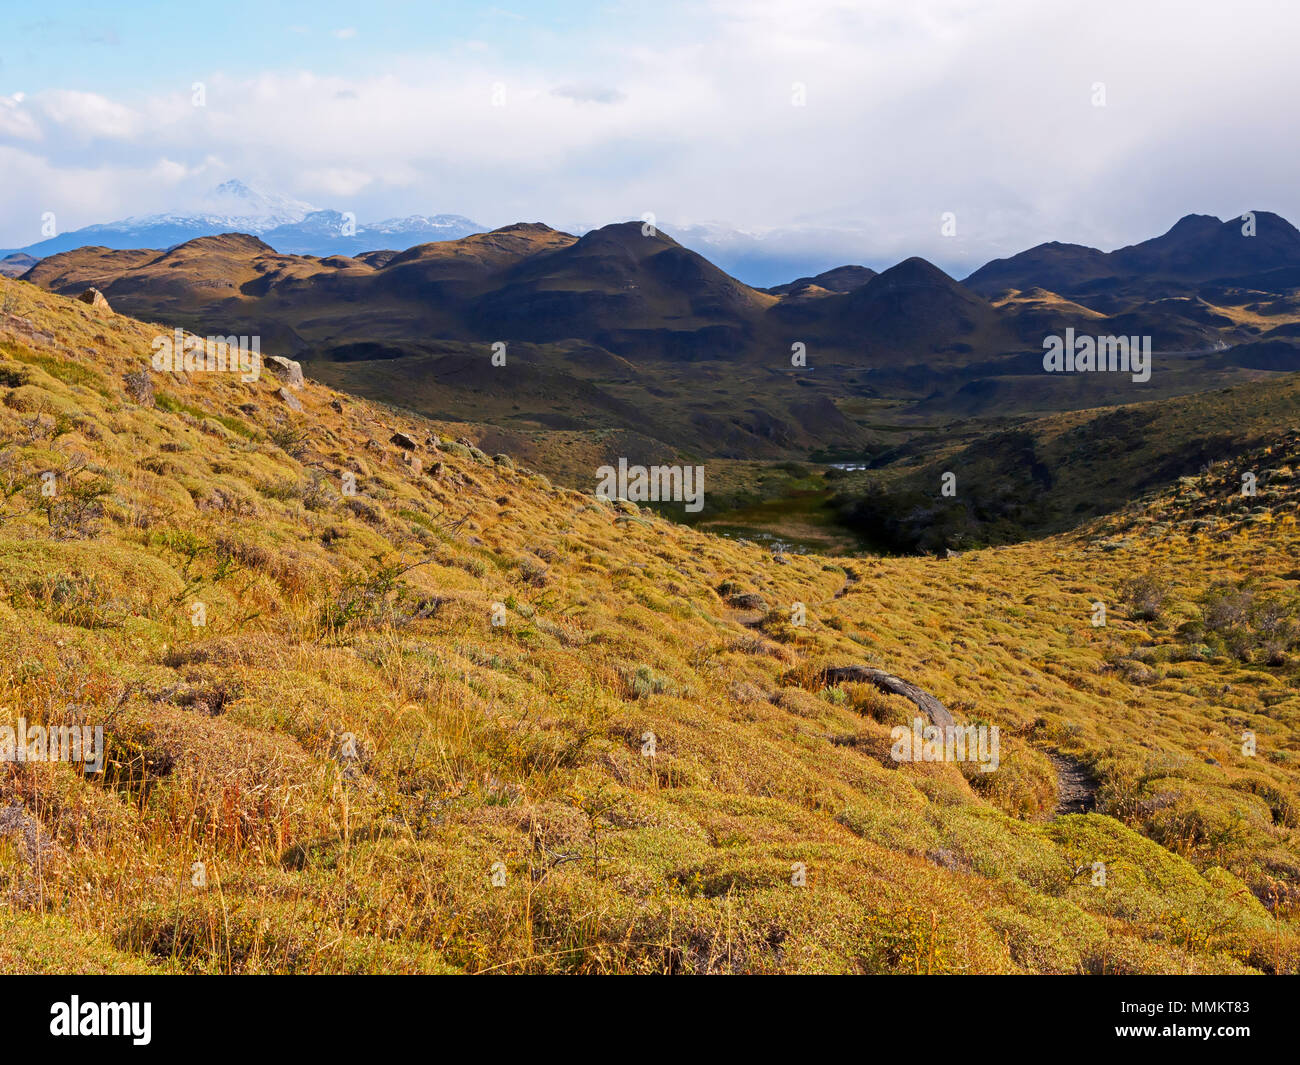 Foothills of the Paine Massif, Torres del Paine National Park, Chile Stock Photo